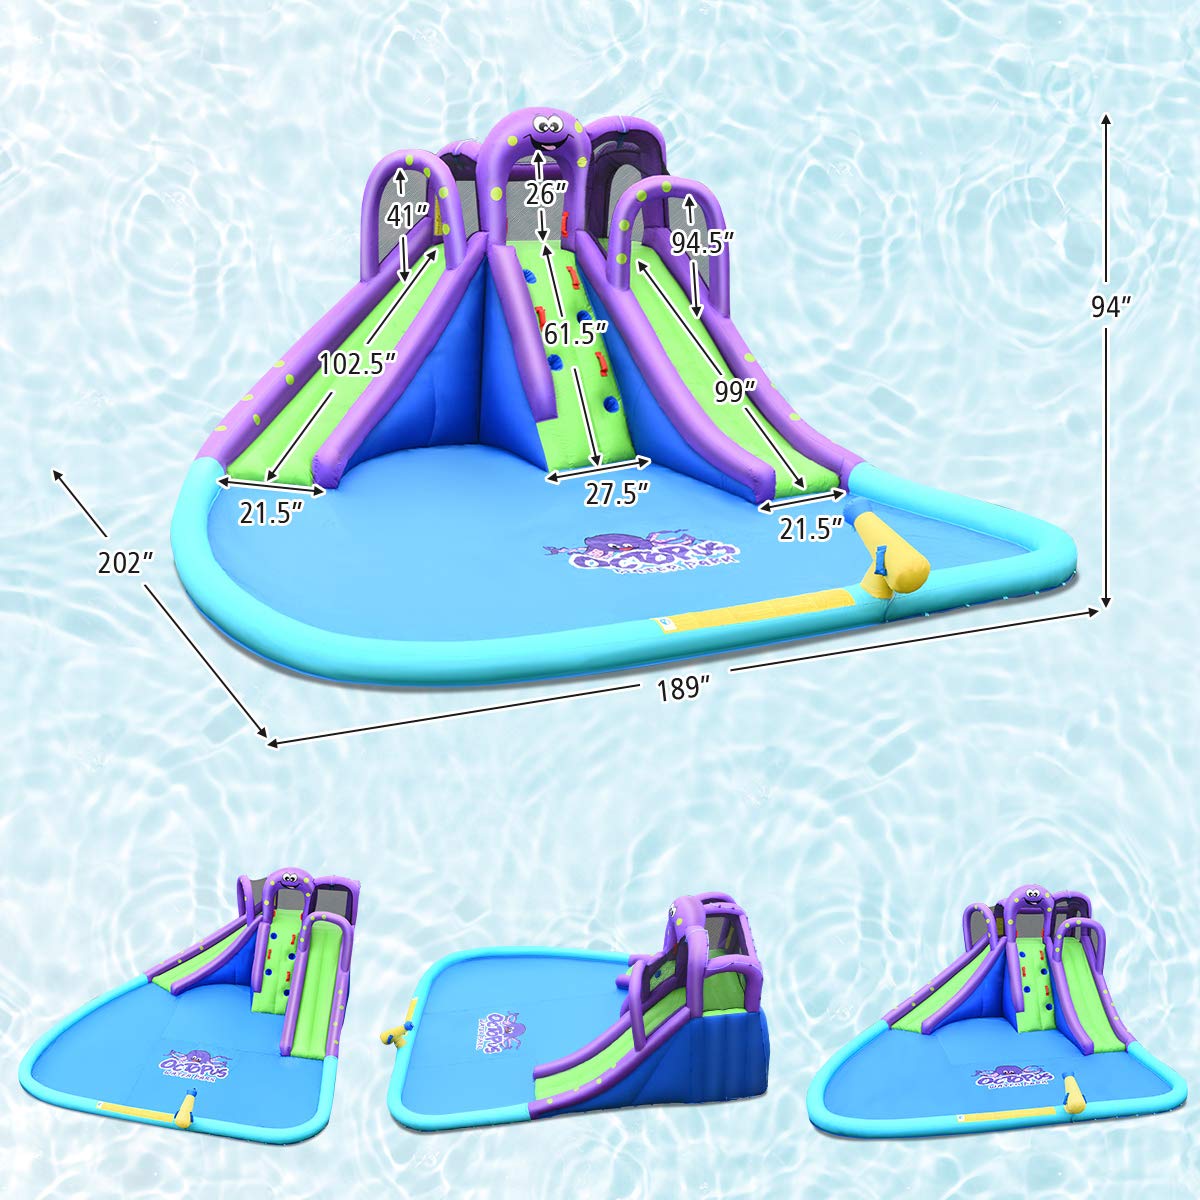 BOUNTECH Inflatable Water Slide, Giant Waterslide Park for Outdoor Fun with 2 Long Slides, Splash Pool, 780w Blower, Climbing, Blow up Water Slides Inflatables for Kids and Adults Backyard Party Gifts Octopus with 780w Air Blower